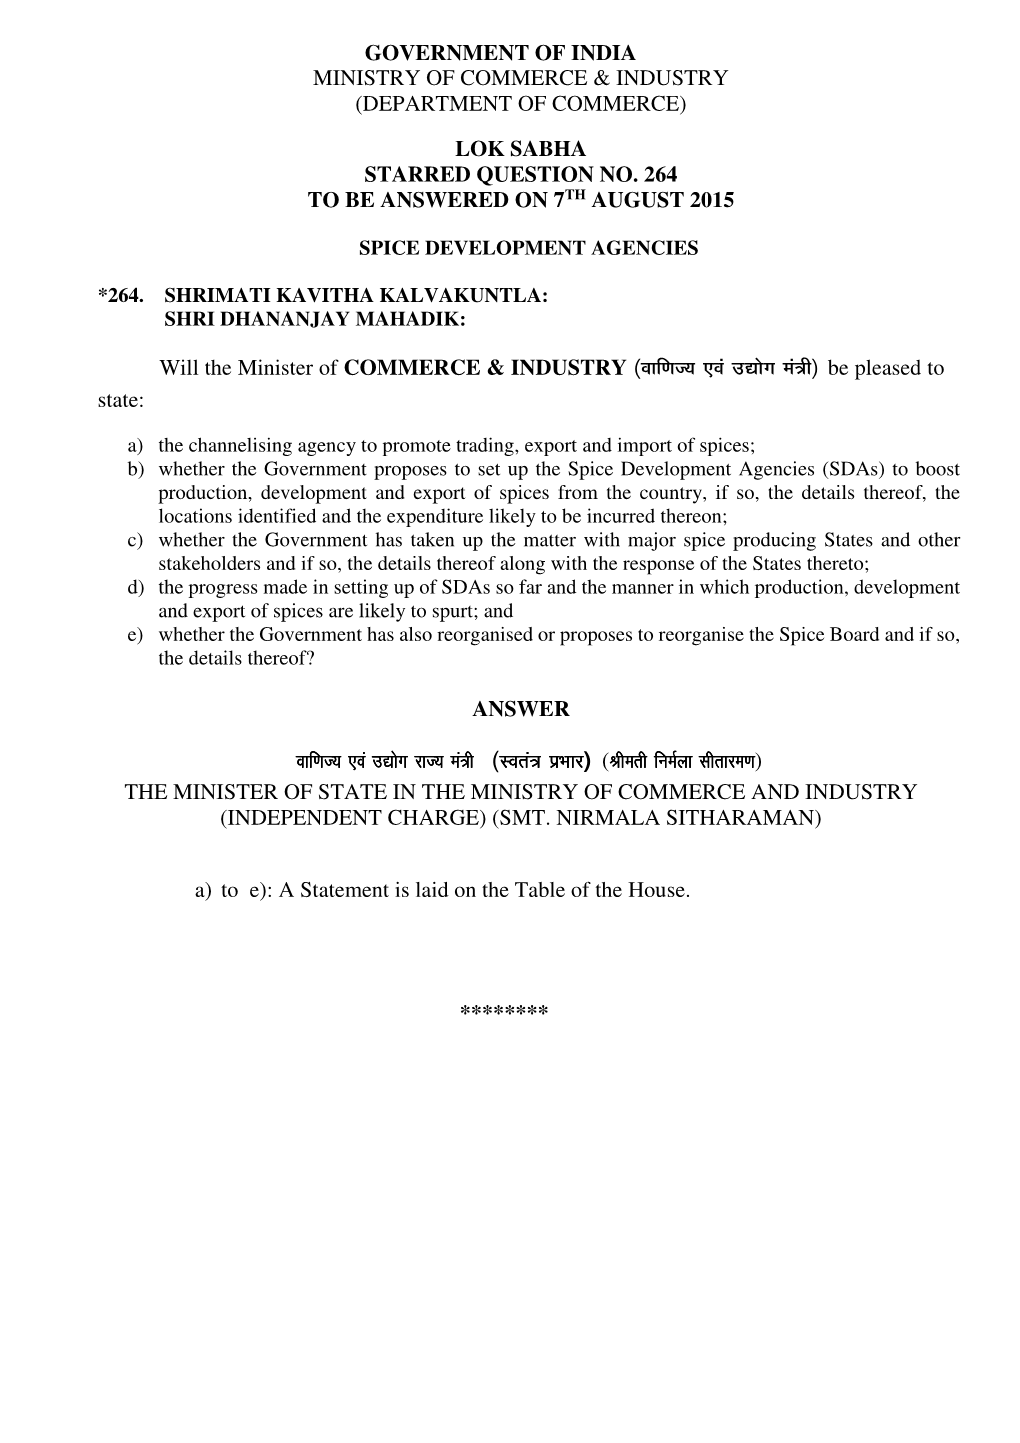 Government of India Ministry of Commerce & Industry (Department of Commerce) Lok Sabha Starred Question No. 264 to Be Answer